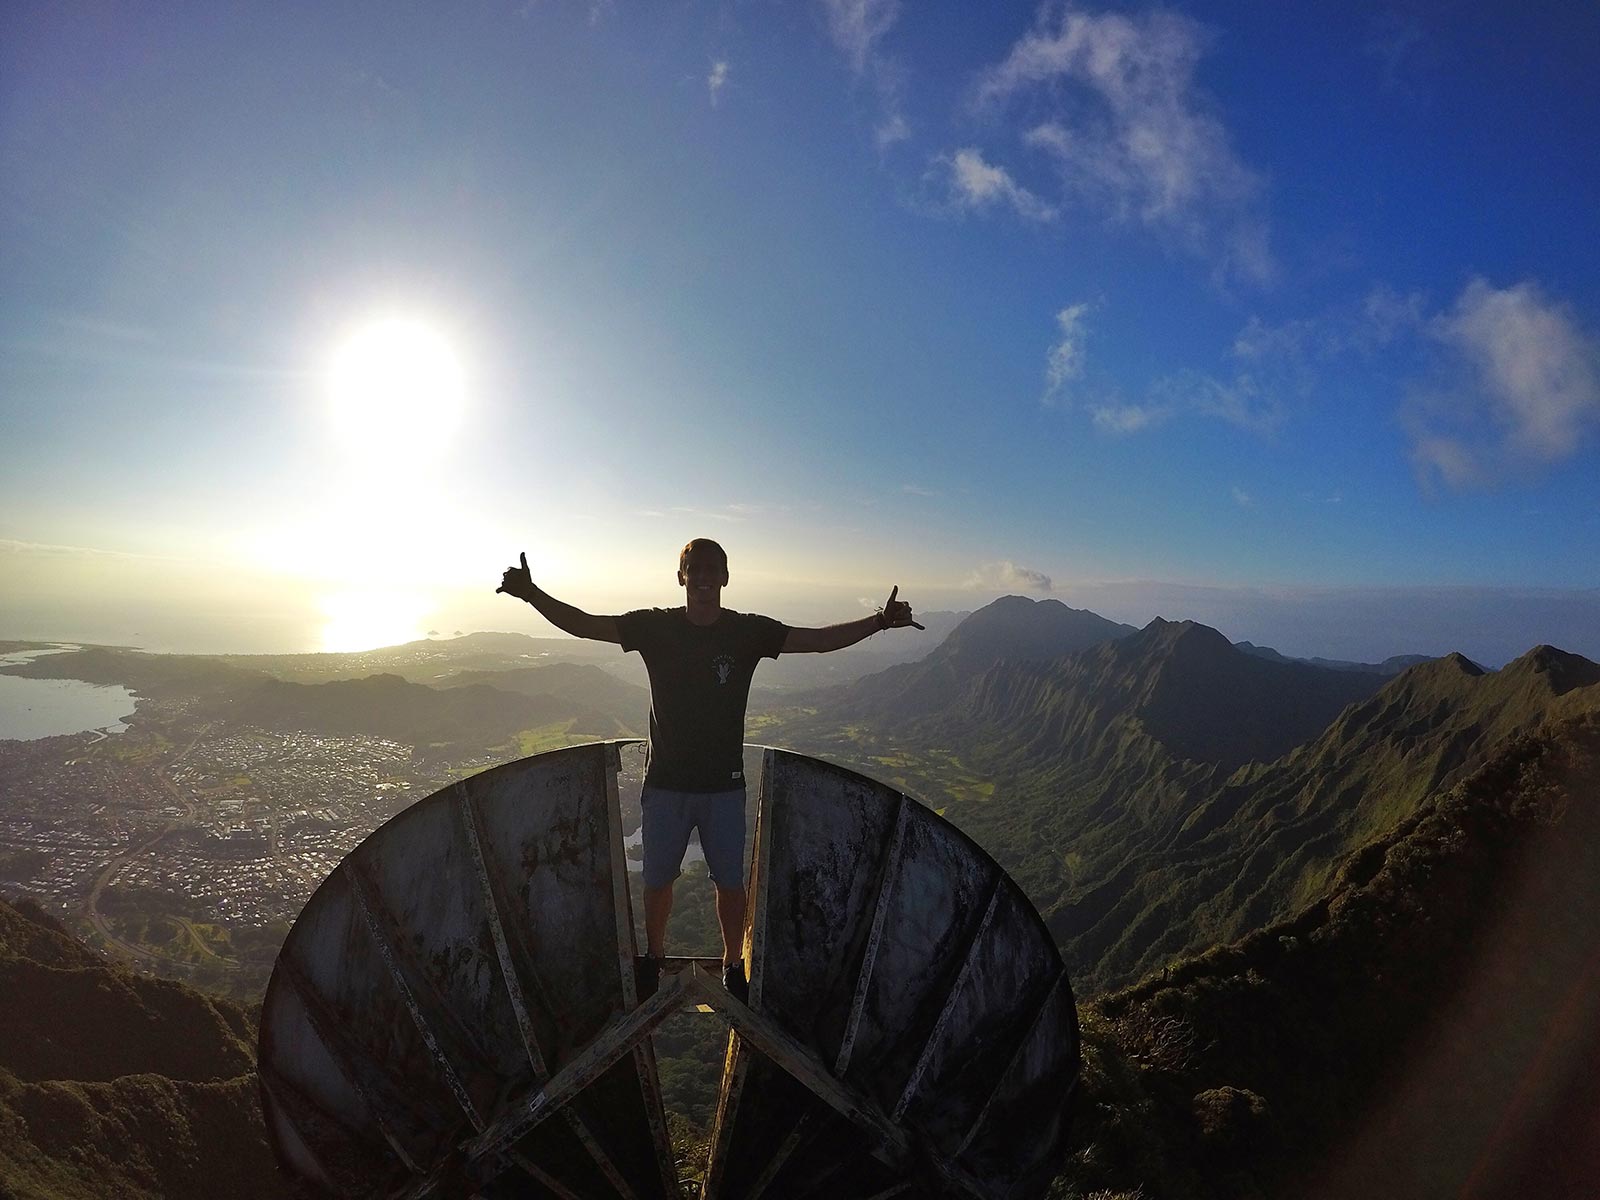 David Simpson on top of old satellite dish at the top of Stairway to Heaven in Oahu, Hawaii. Climbing the stairway to heaven, Hawaii & full guide